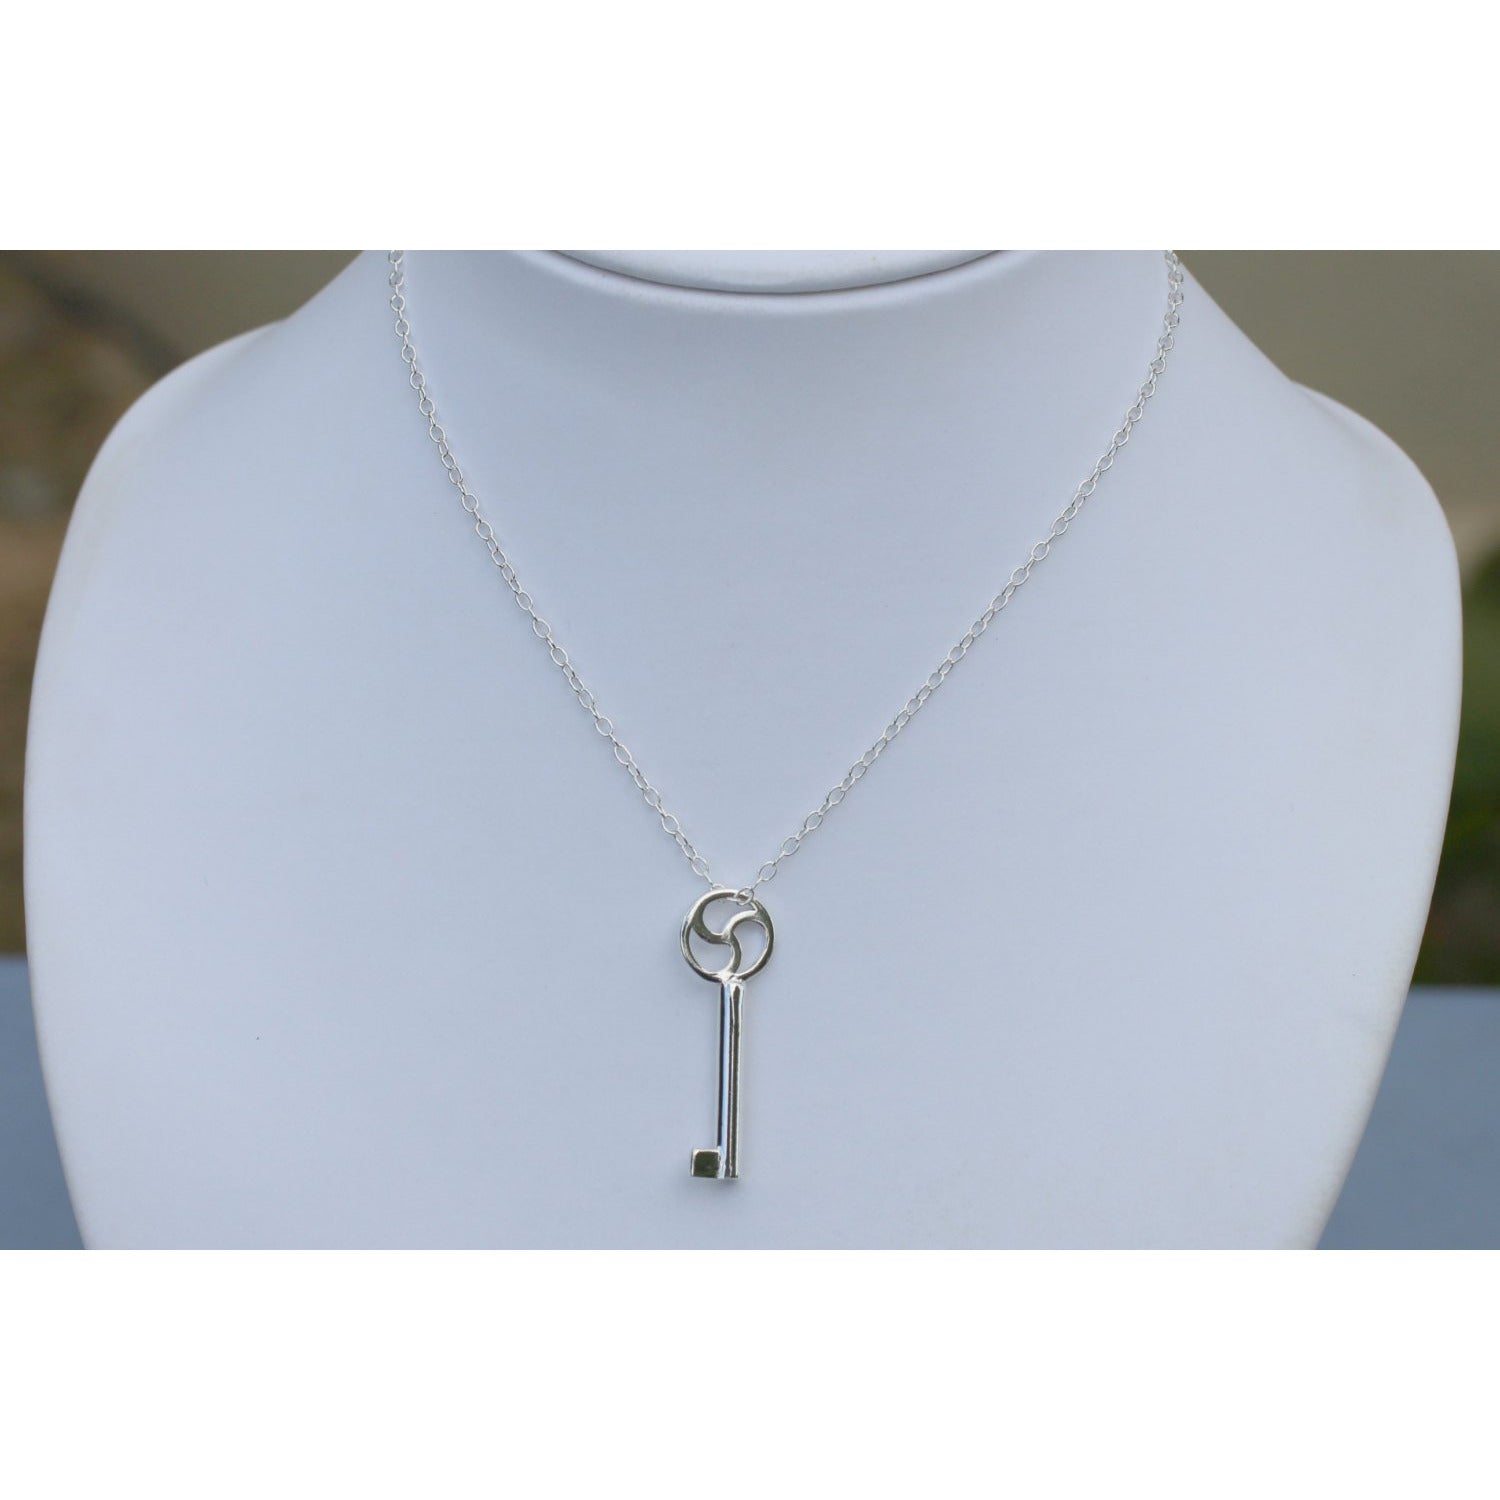 925 Sterling Silver Key and Lock Necklace, Small Silver Key and Lock Necklace, 925 Sterling Silver Pendant and Chain.